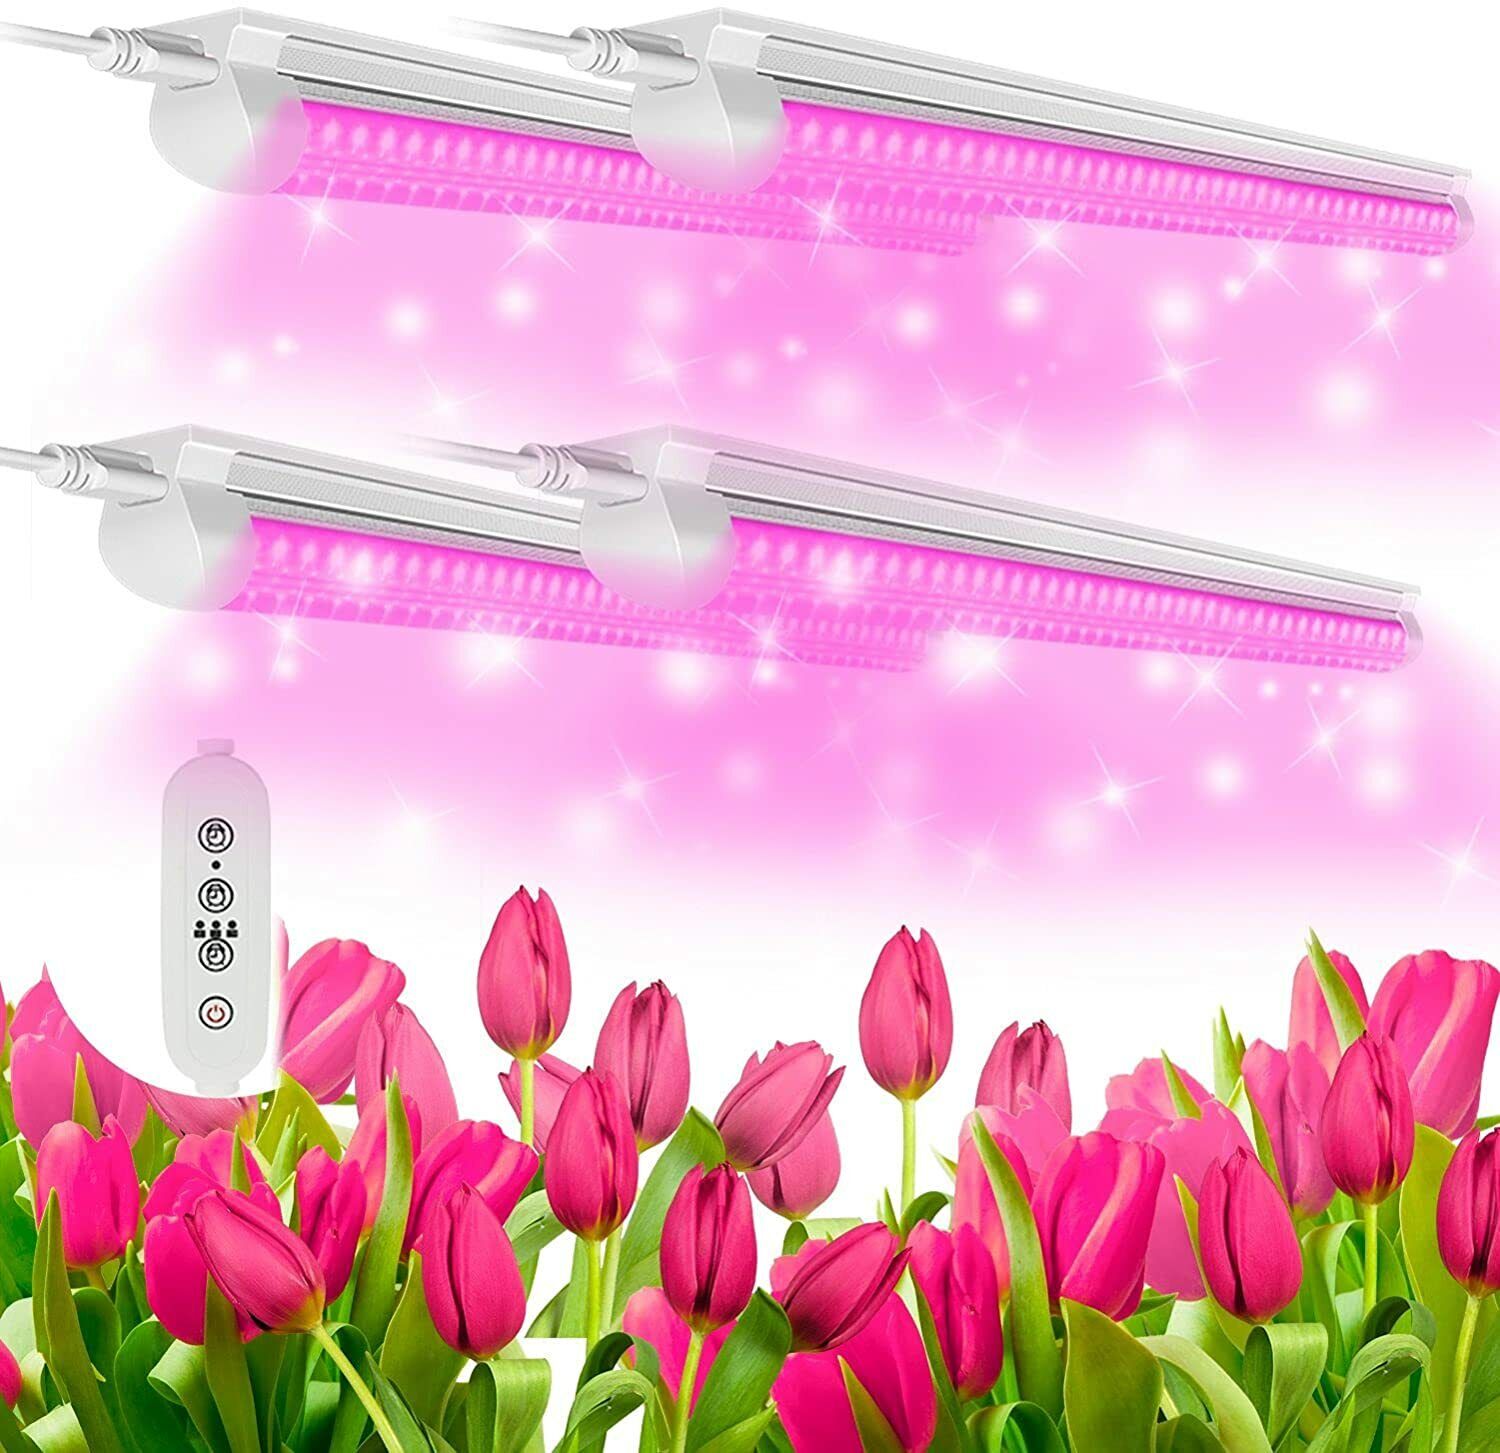 T8 4FT 50W LED Grow Light Fixture Full Spectrum Plant Growing Lamp With Timer